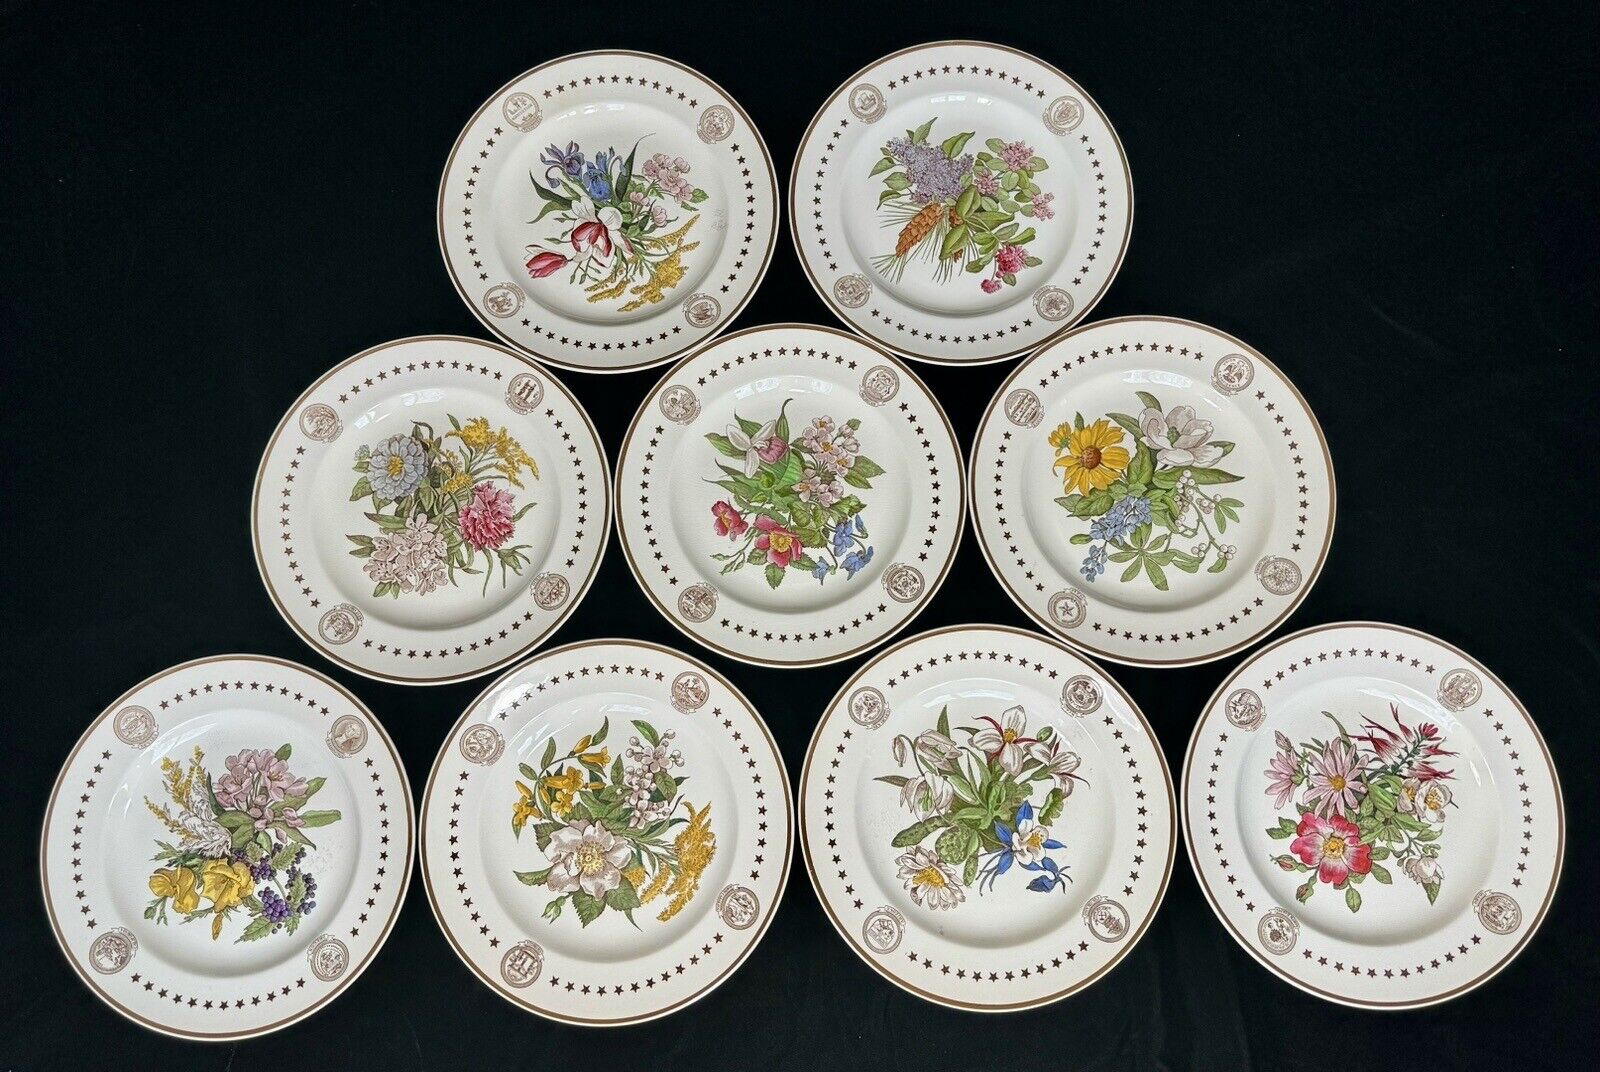 Rare 1939 Wedgwood American State Flower Plates 1st Edition Set of 9, All Unique